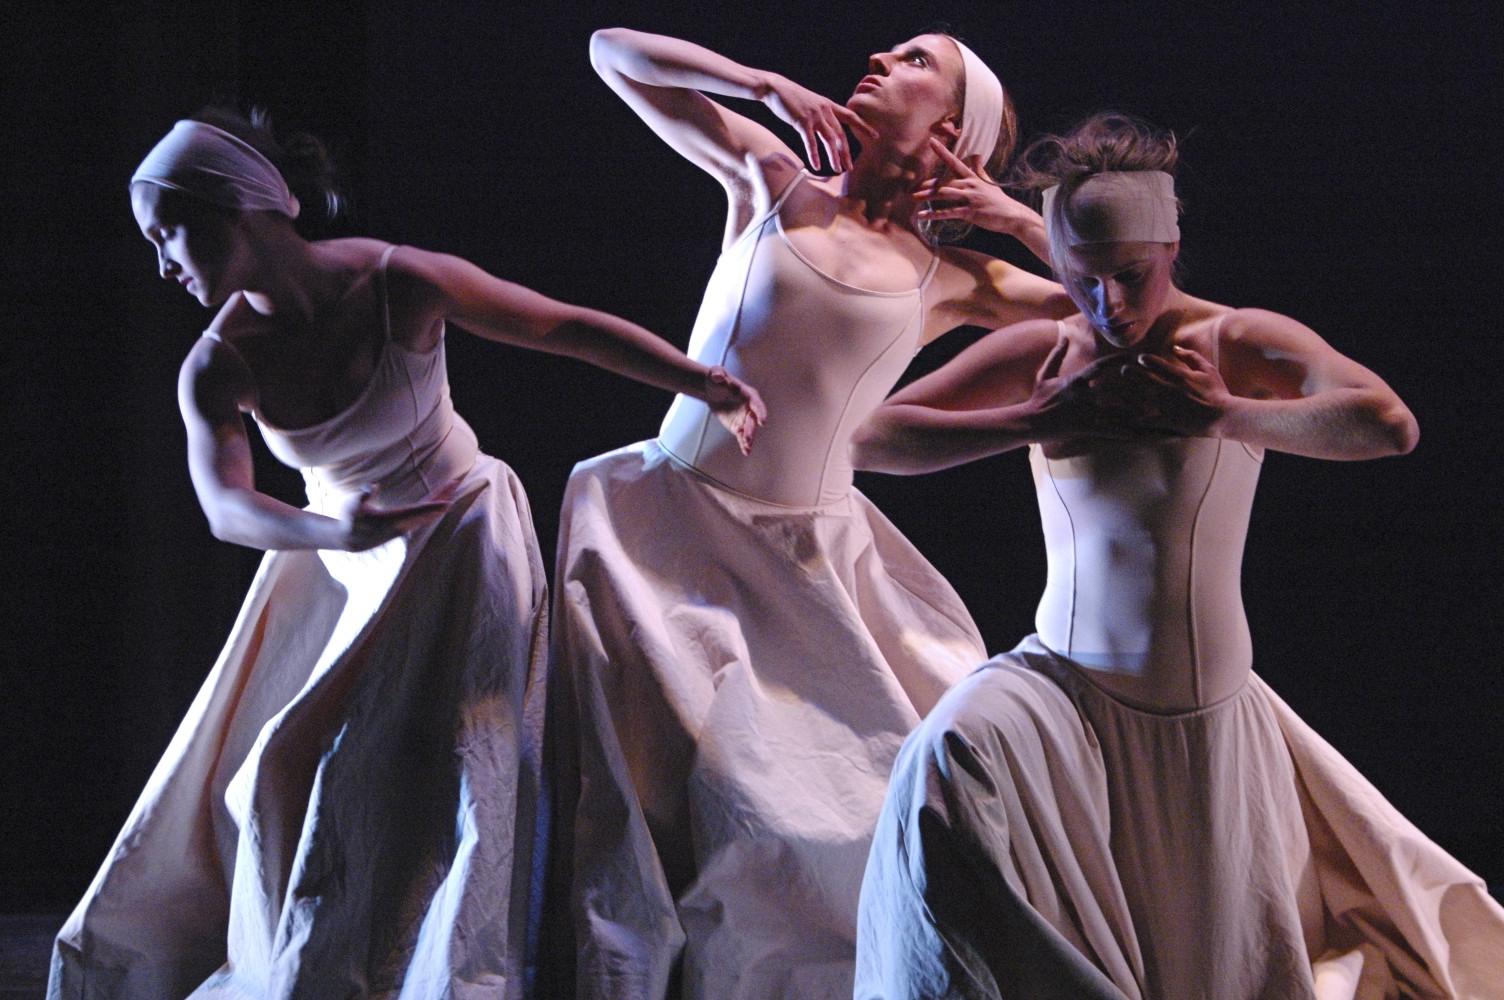 2005 Faculty Dance Concert, My end is my beginning by Patrizia Herminjard <span class="cc-gallery-credit"></span>